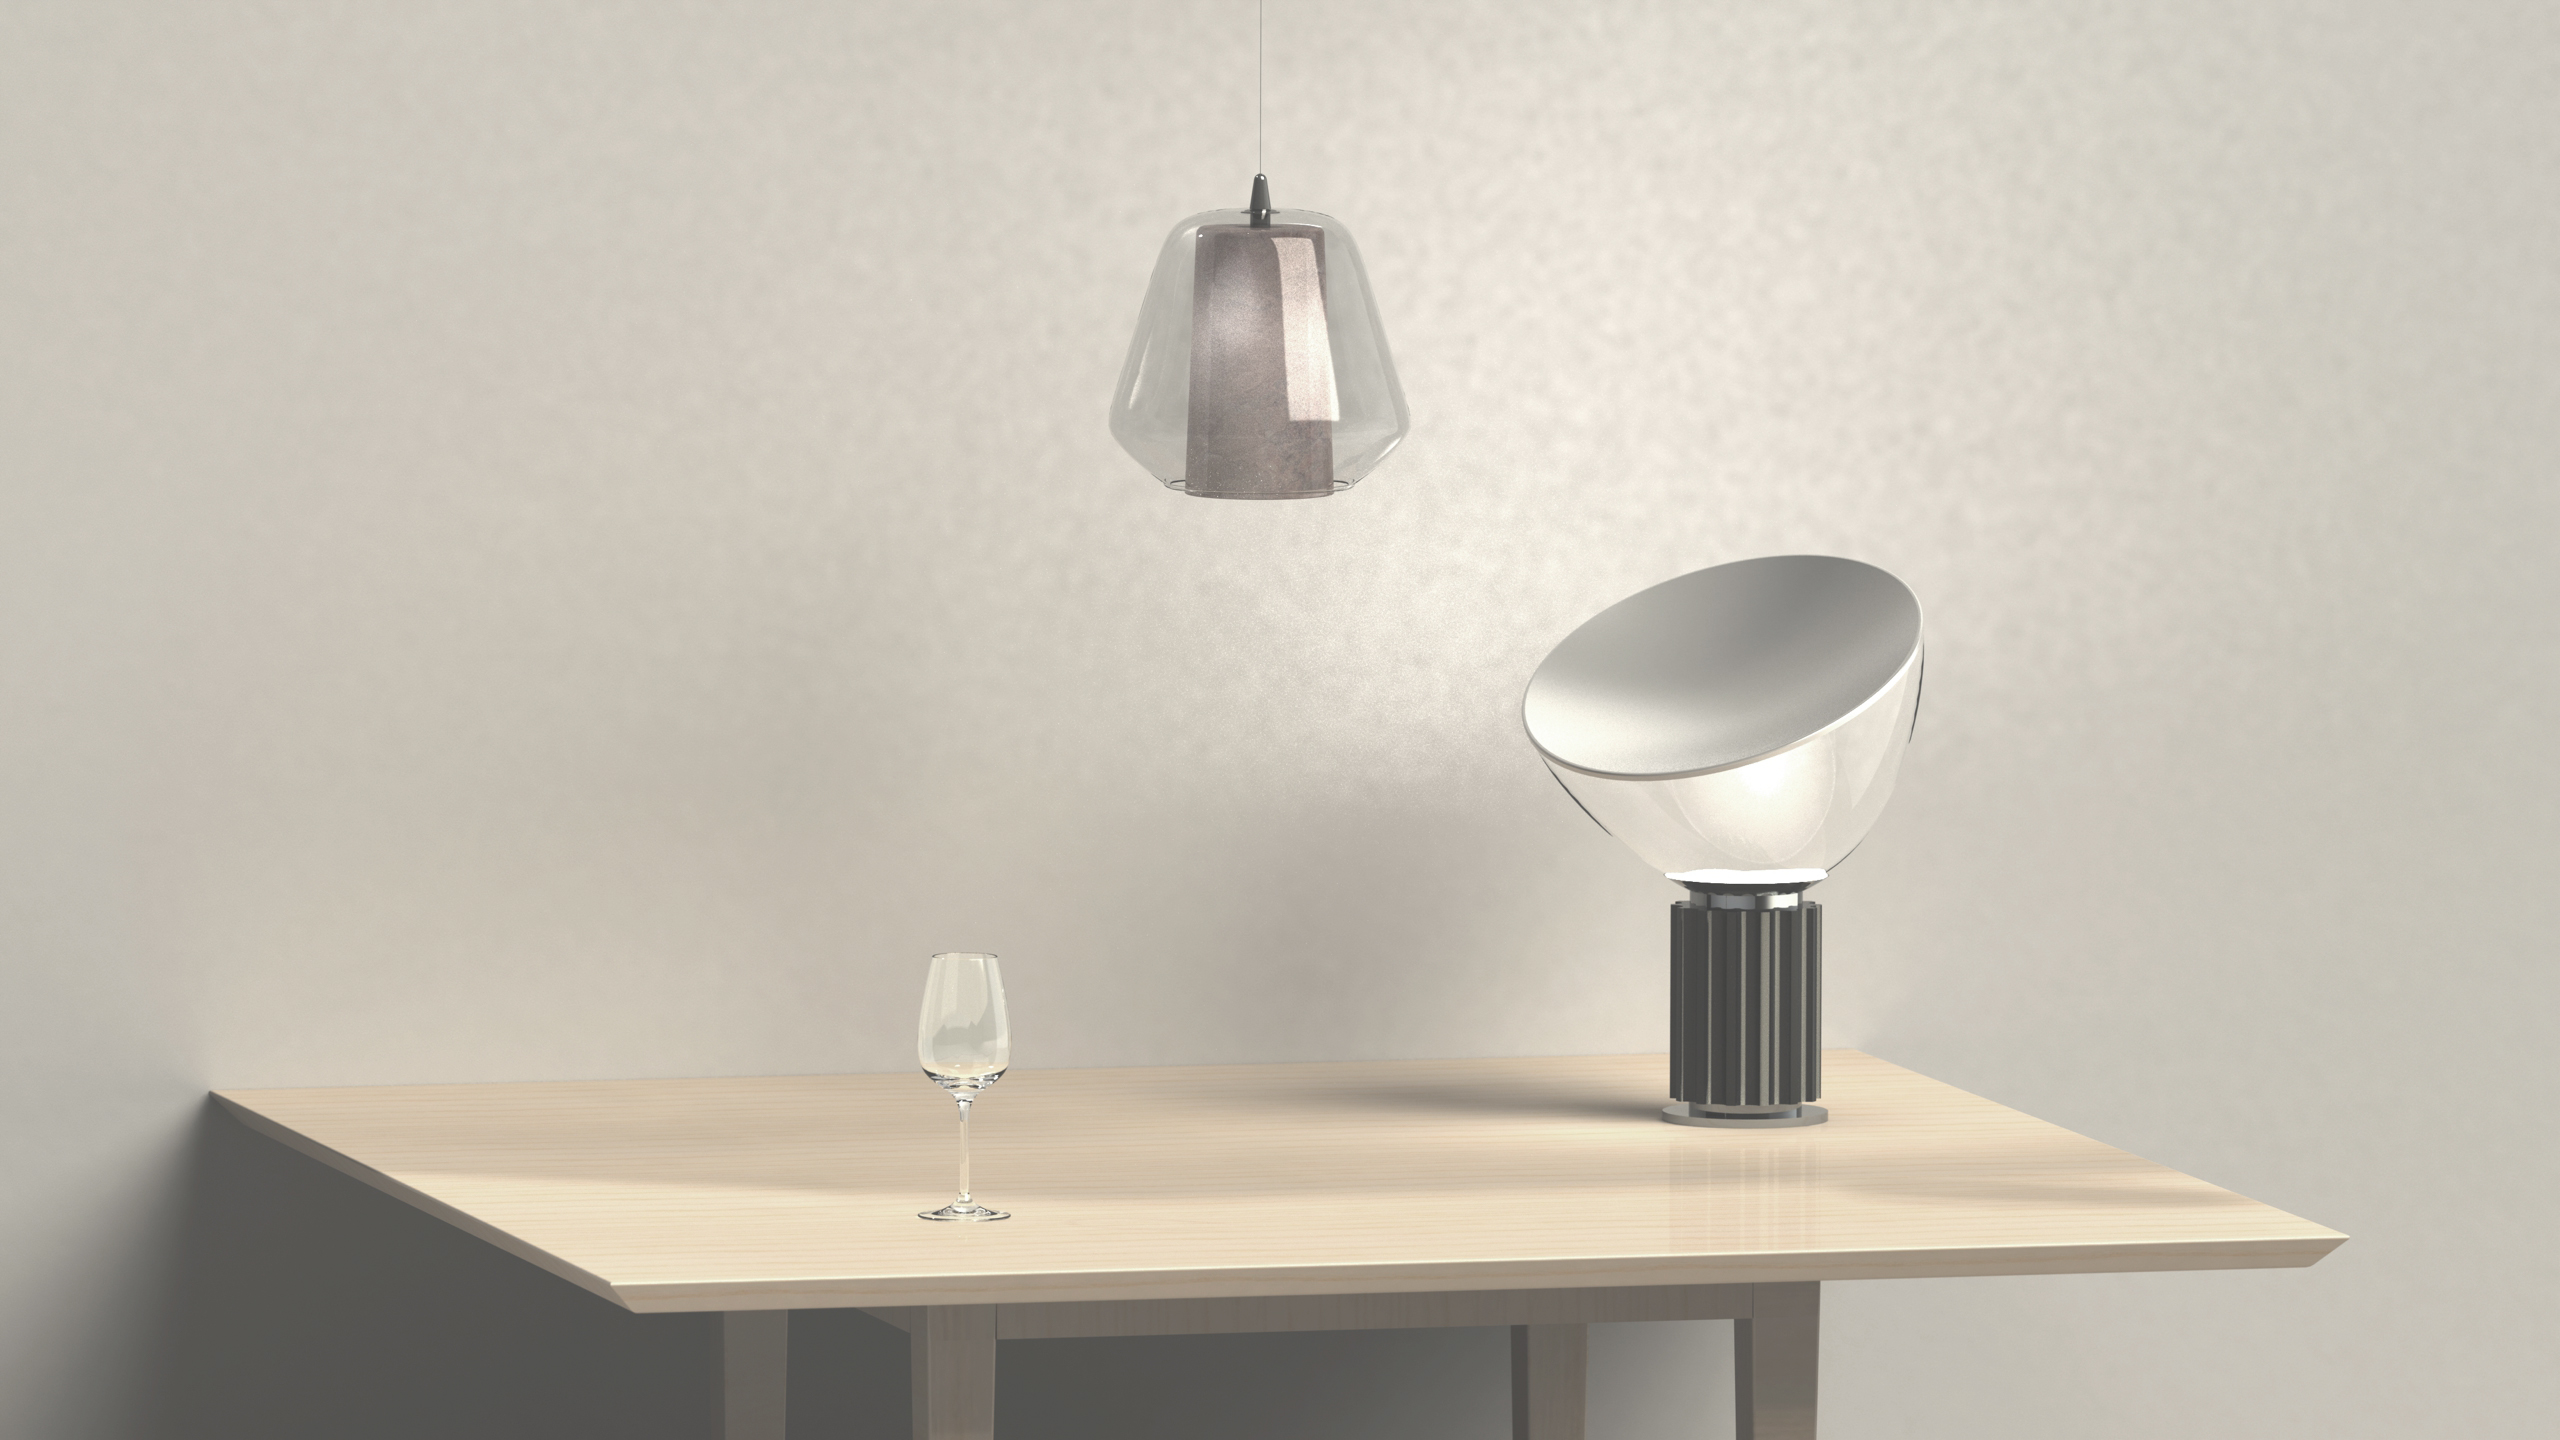 Solidworks render with Taccia from Flos, by Sebastian Galo